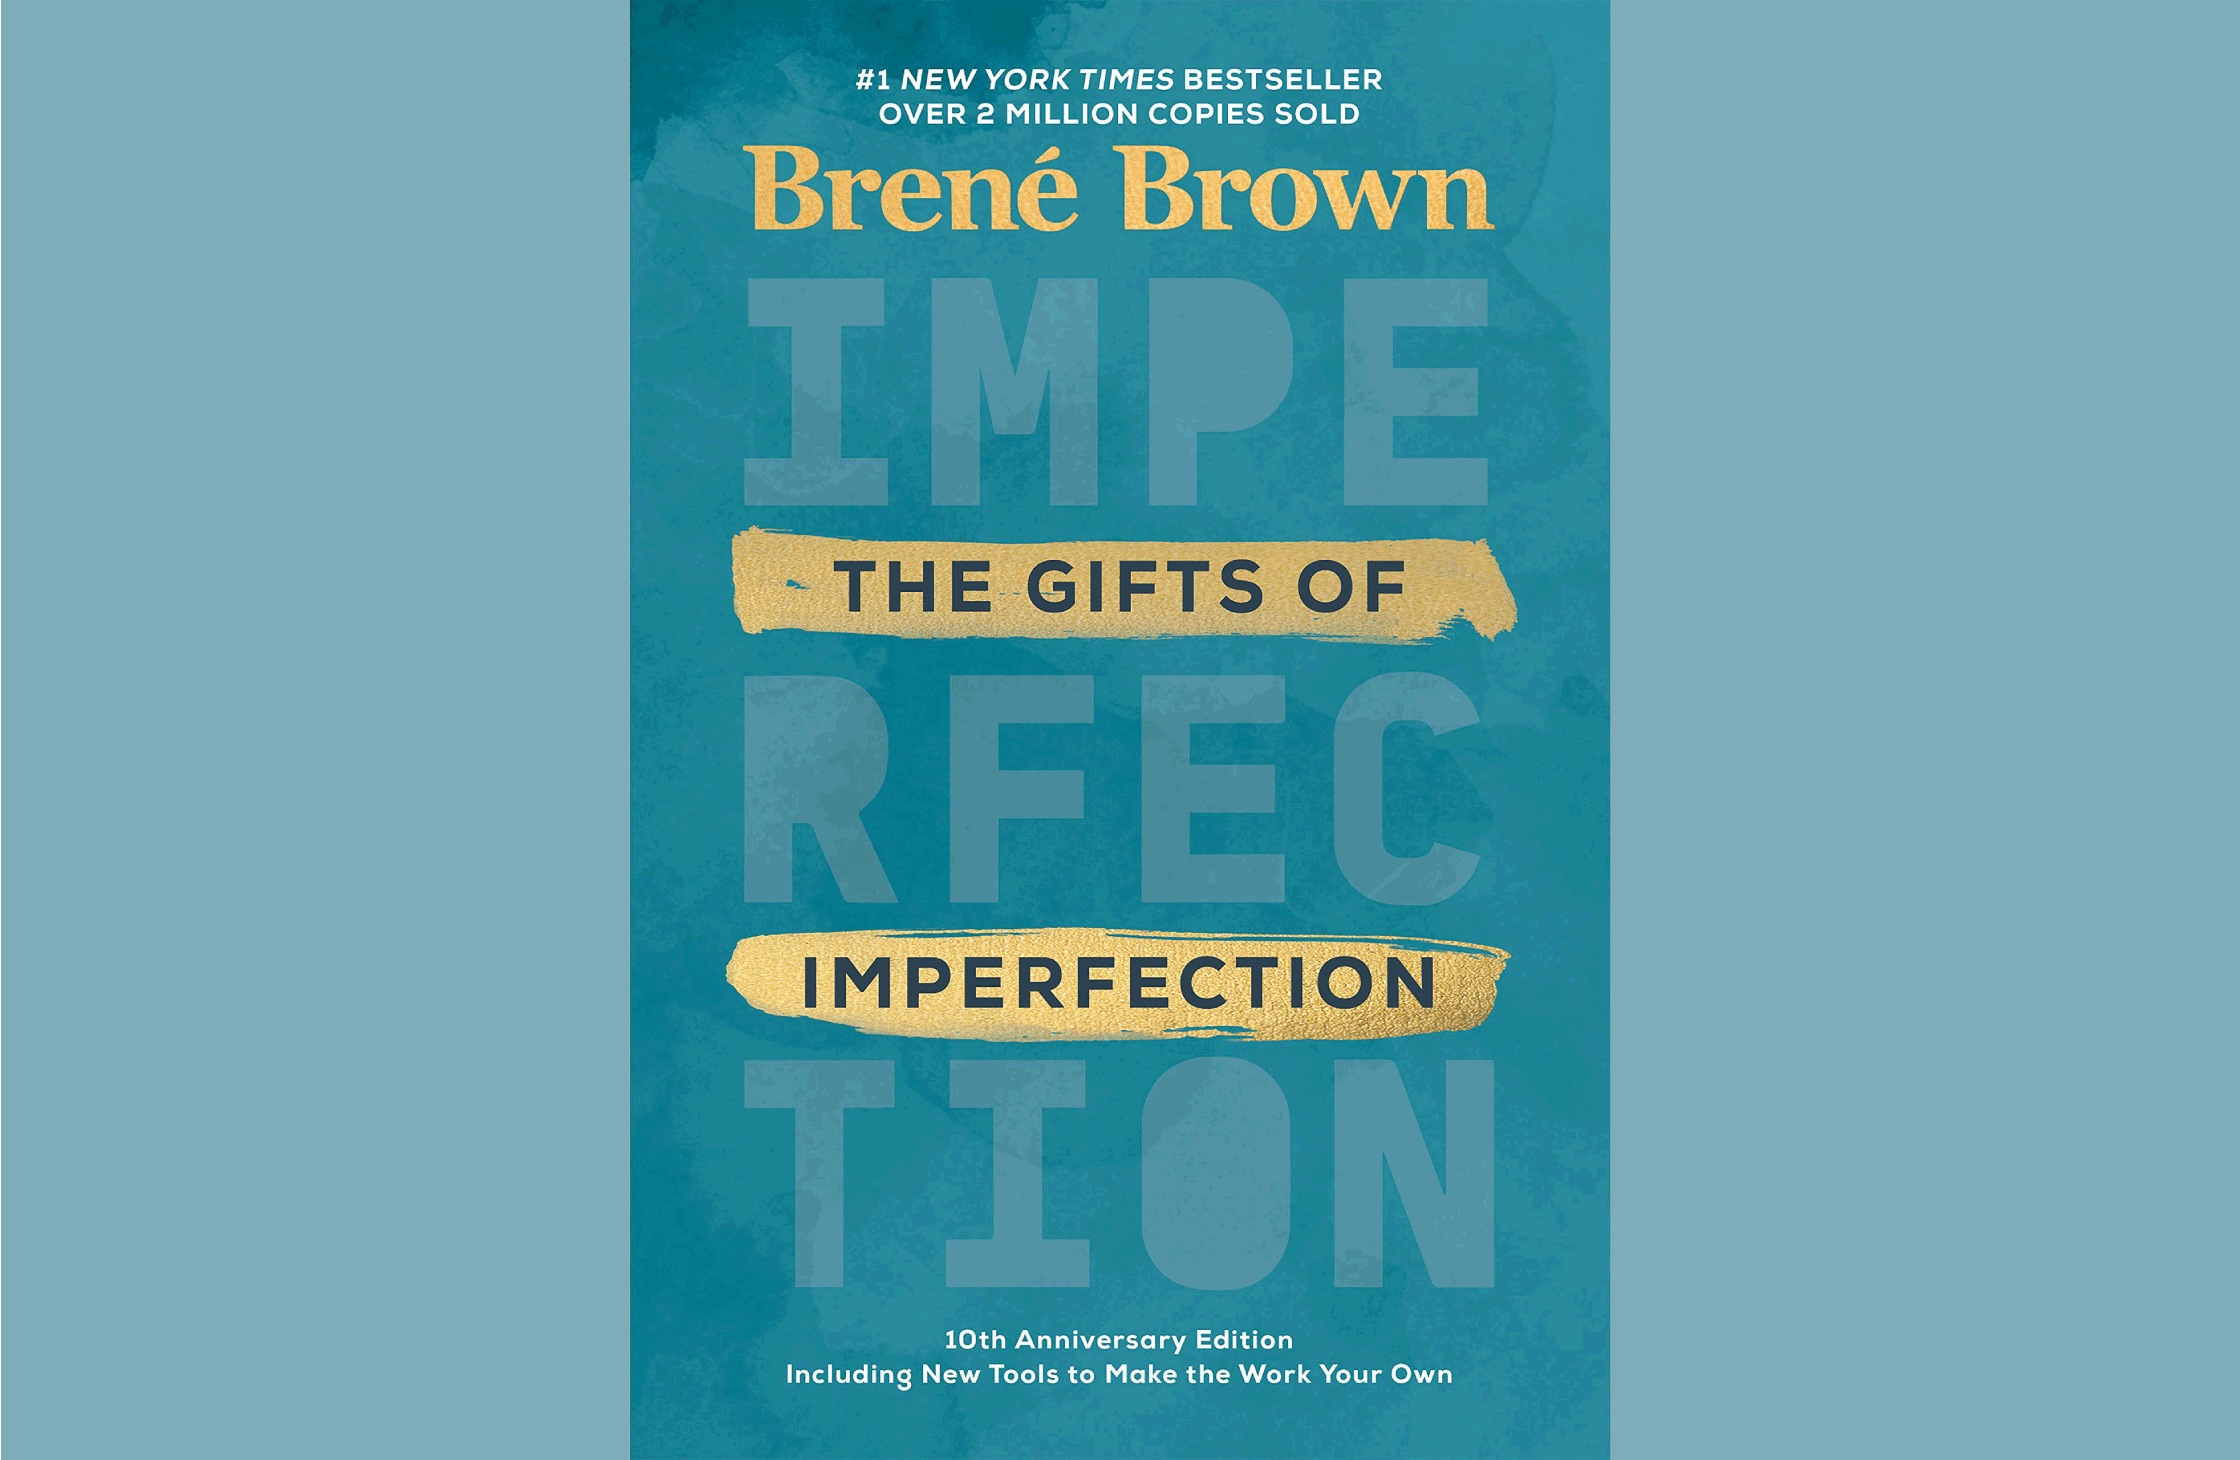 Summary: The Gifts of Imperfection: Brené Brown